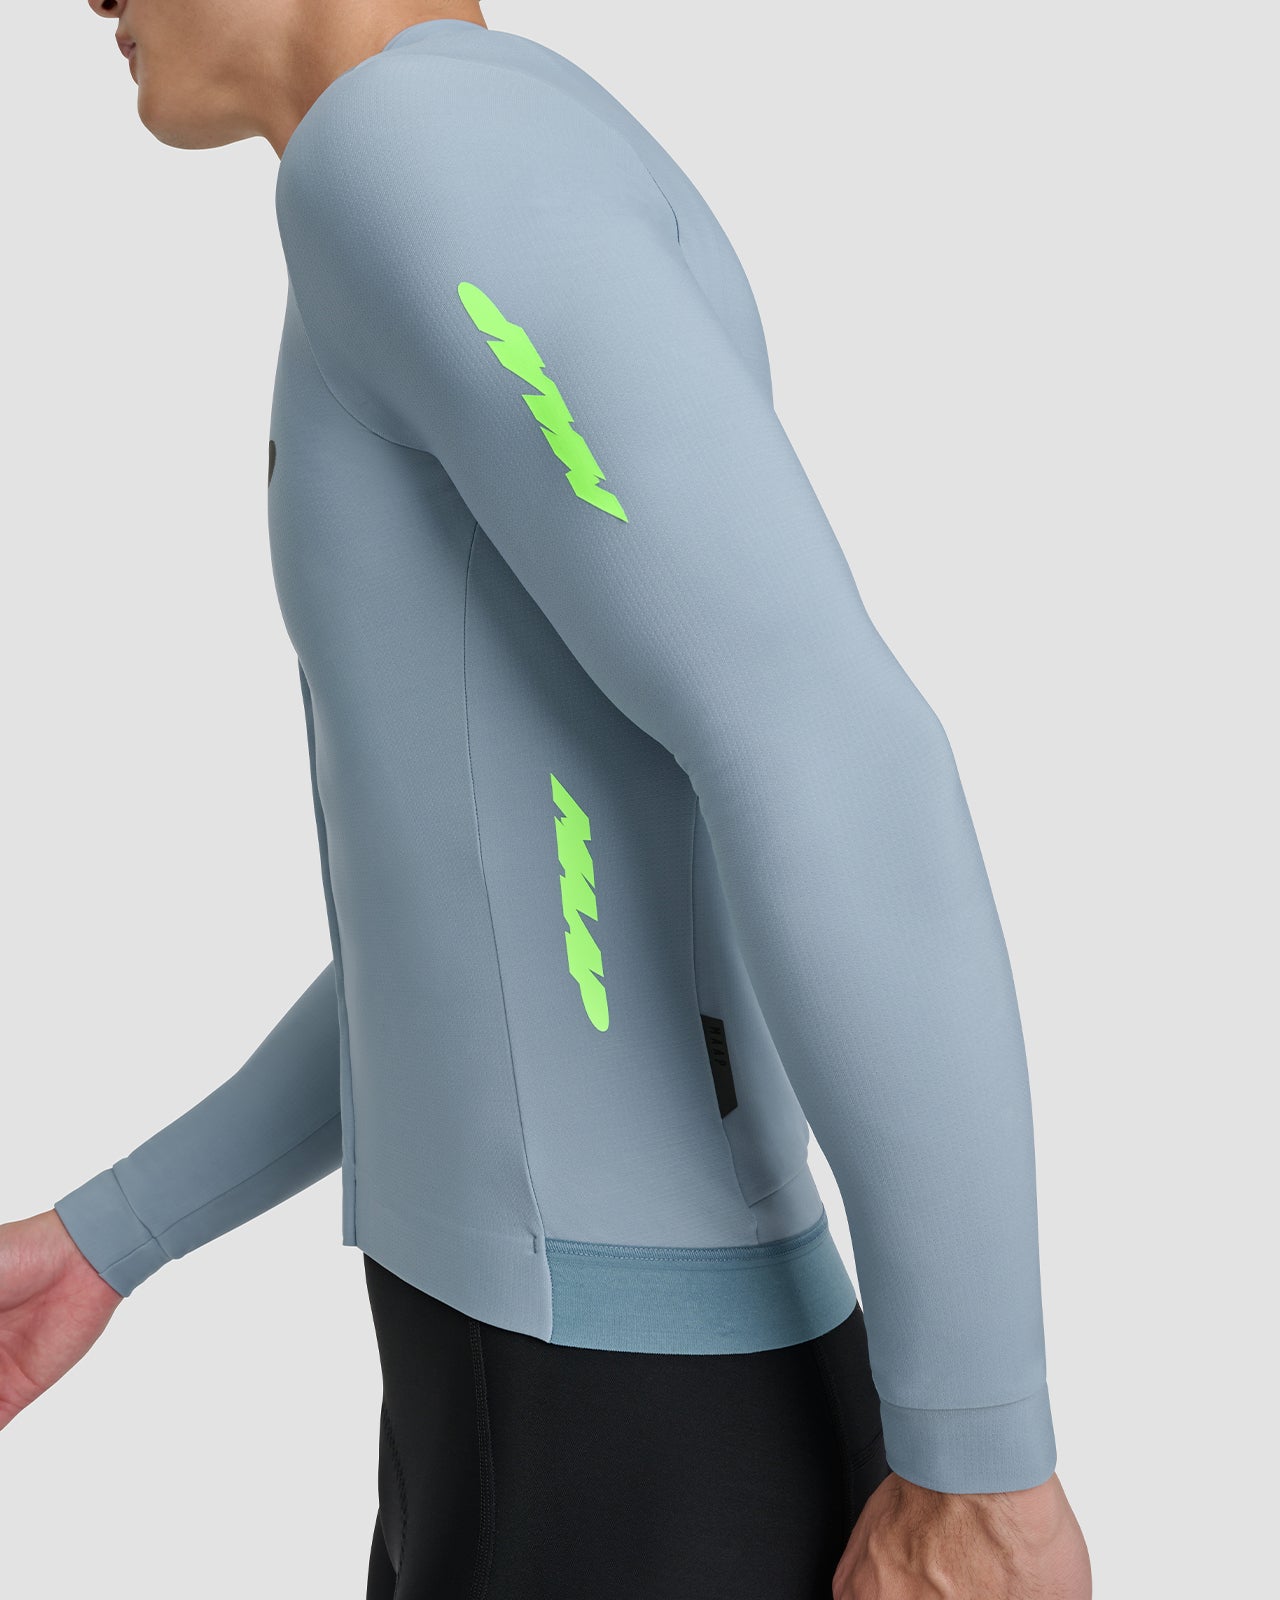 Eclipse Thermal LS Jersey 2.0 - MAAP Cycling Apparel